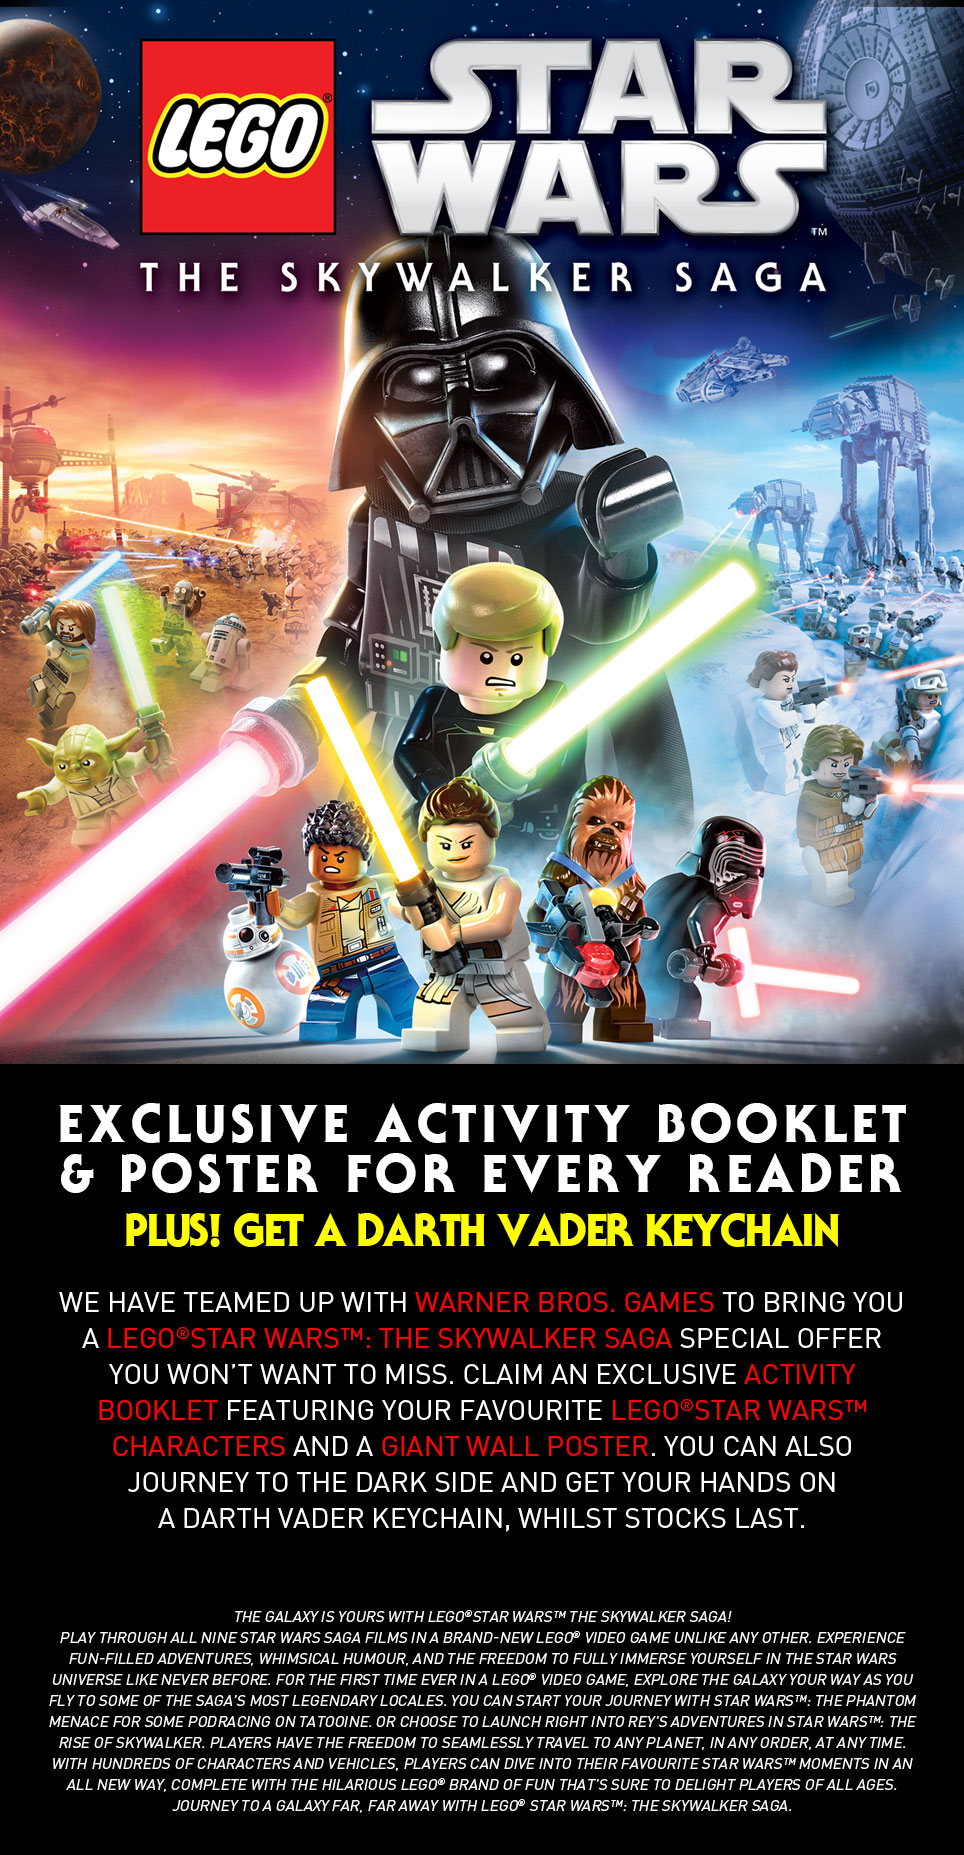 EXCLUSIVE ACTIVITY BOOKLET & POSTER FOR EVERY READERPLUS! GET A DARTH VADER KEYCHAIN